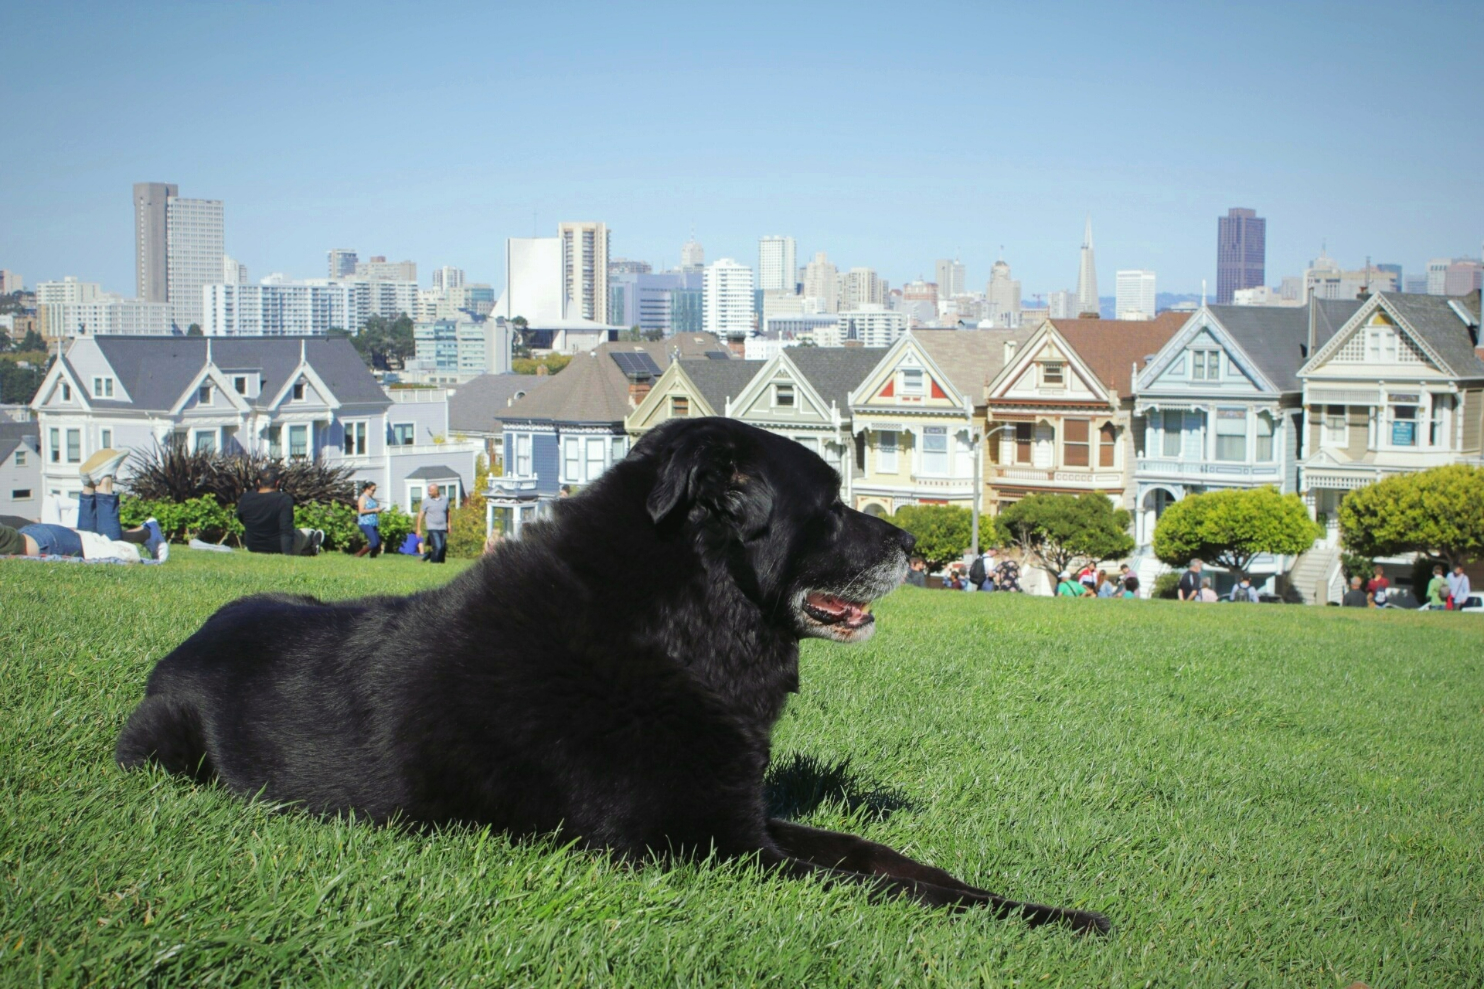 The Painted Ladies - Nob Hill